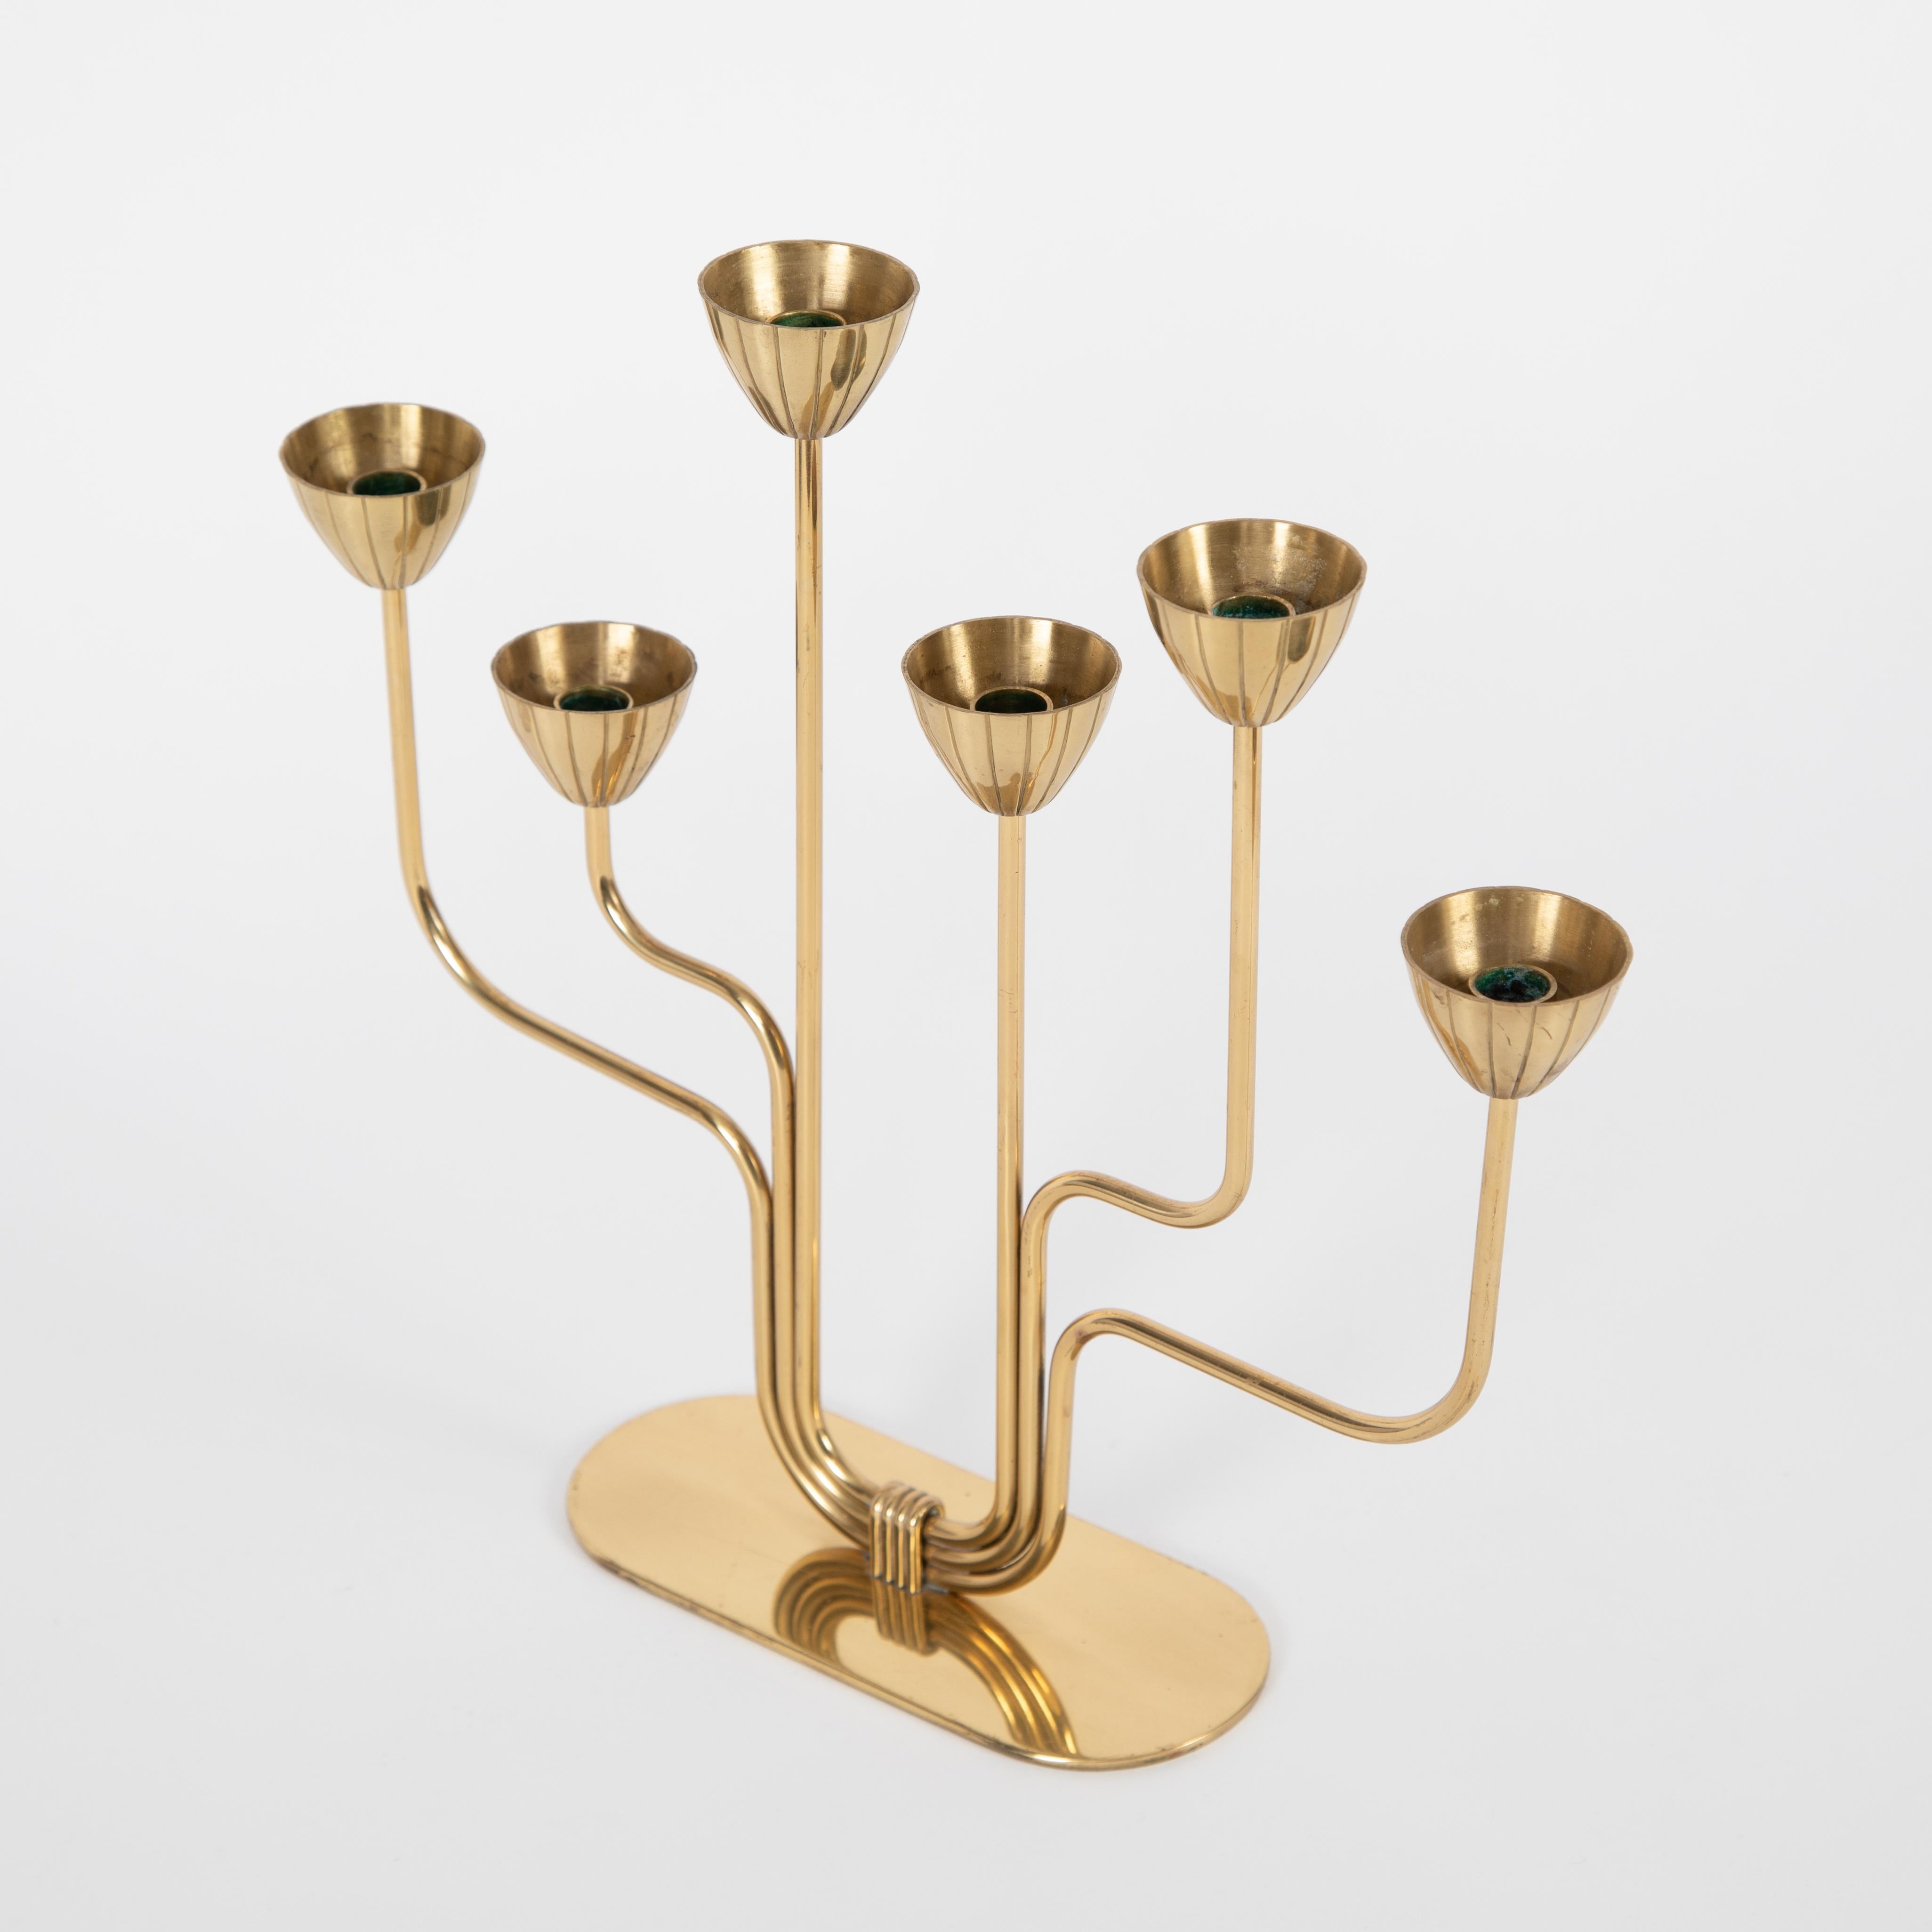 Gunnar Andersen for Ystad-Metall Candelabrum in Brass, circa 1960s In Good Condition For Sale In Brooklyn, NY